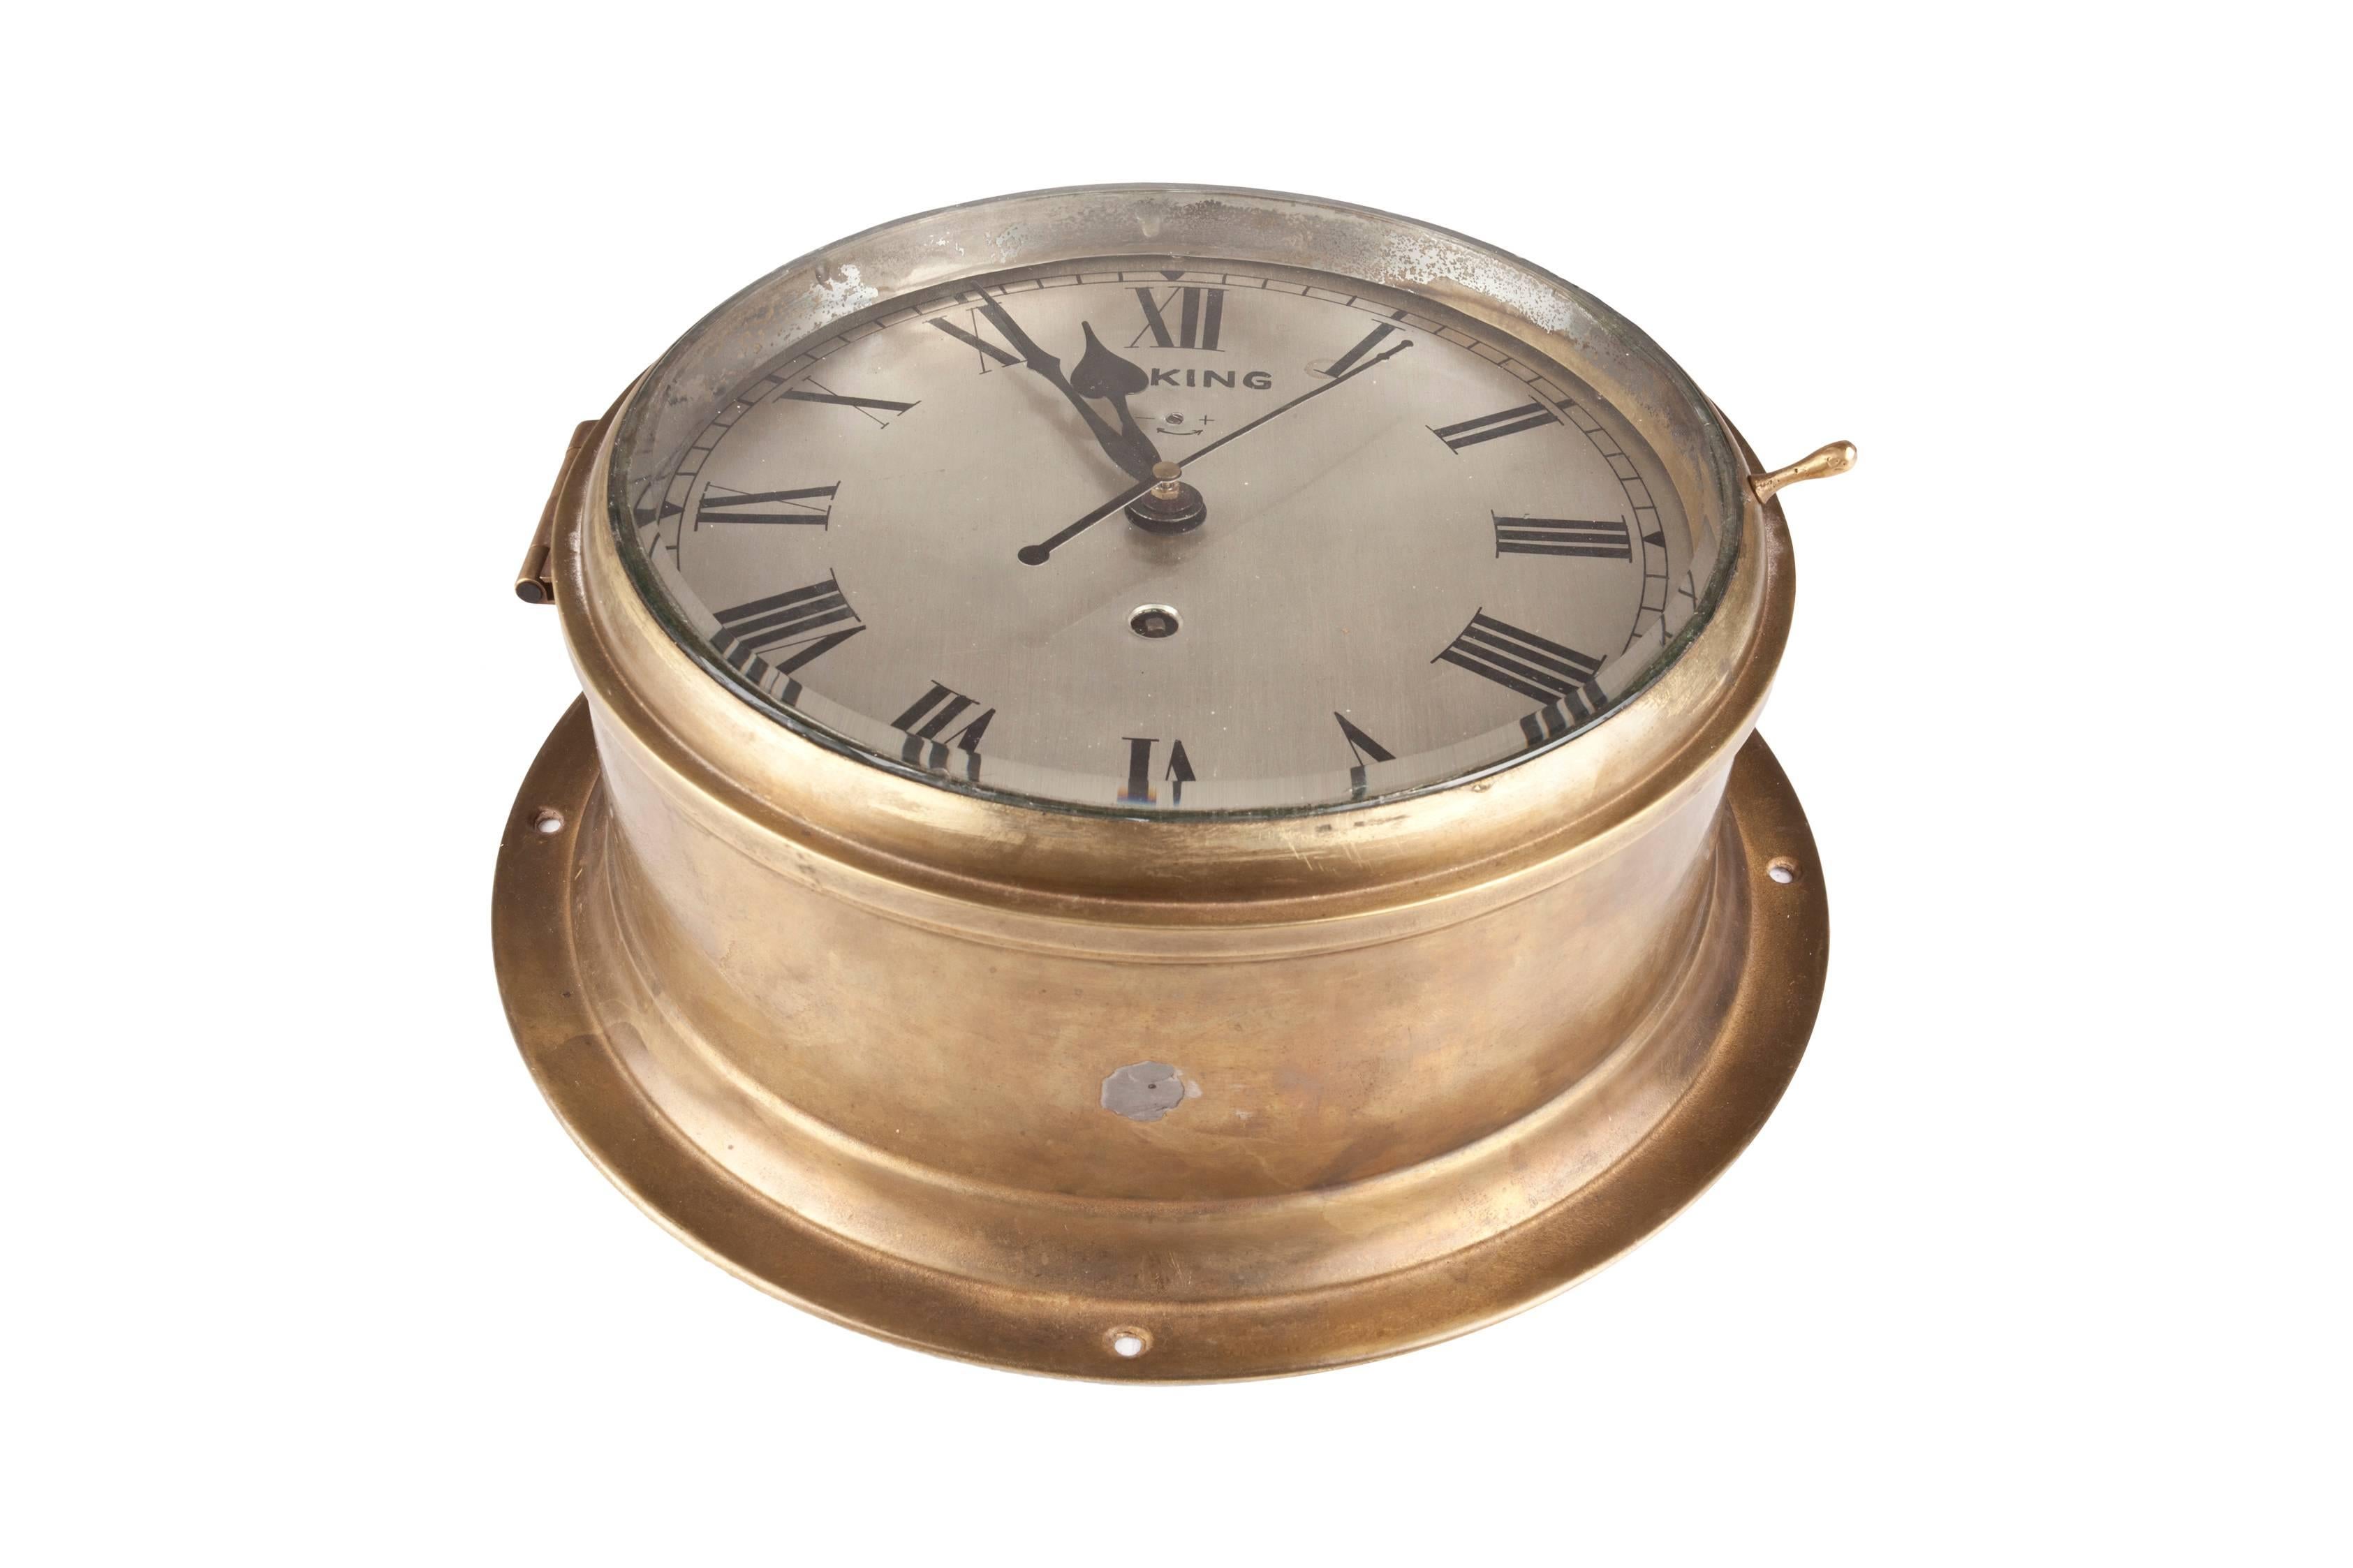 A handsome ship's clock in a brass casing with nickel face and roman numerals. Signed Viking. This is a spring mechanism clock which you wind every 8 days. In excellent working order. Easy to mount on the wall or place on a stand, circa 1960,